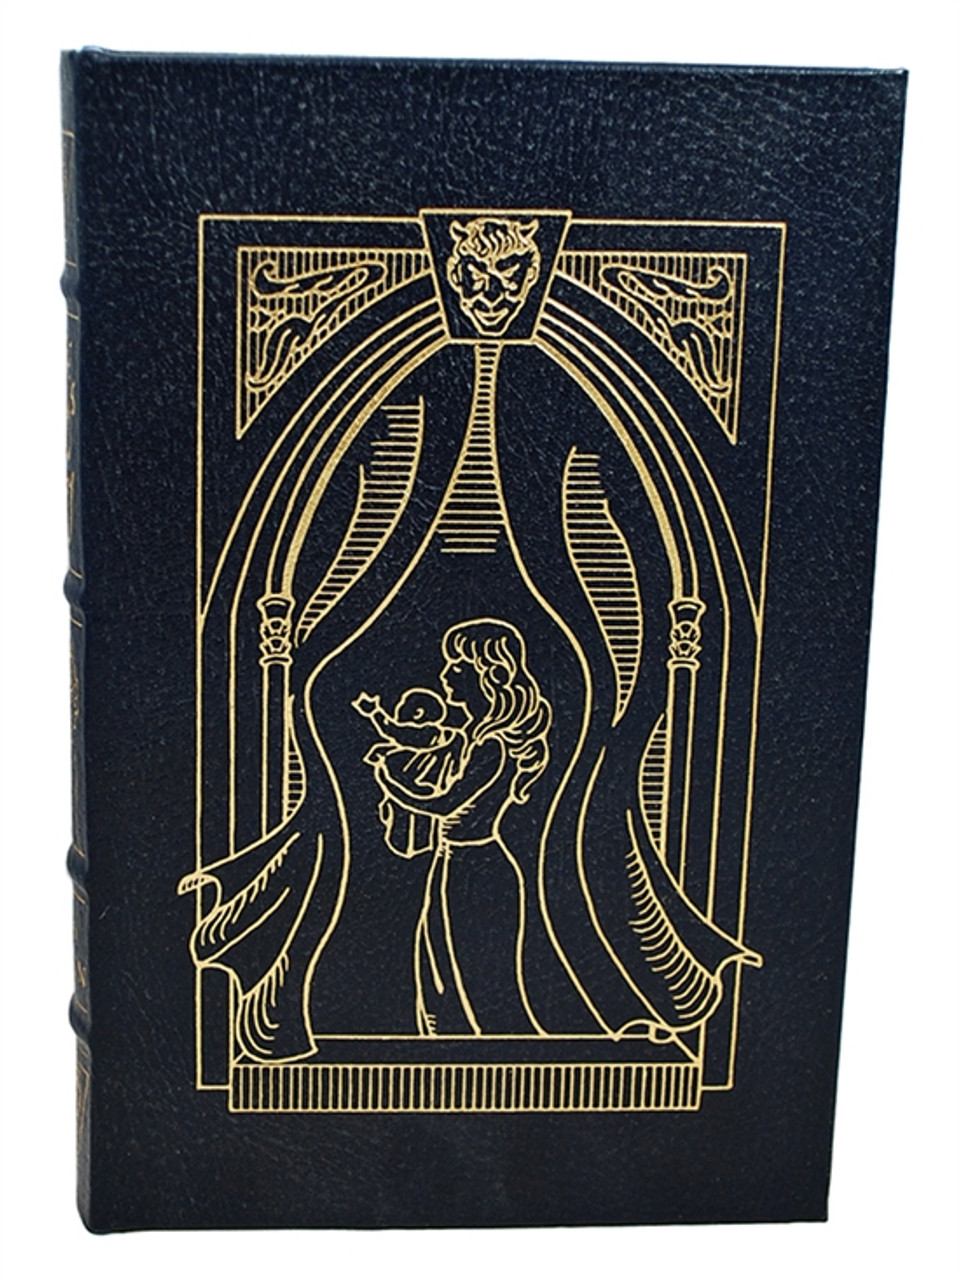 Easton Press "Rosemary's Baby" Ira Levin, luxurious leather bound collectors edition [Very Fine]